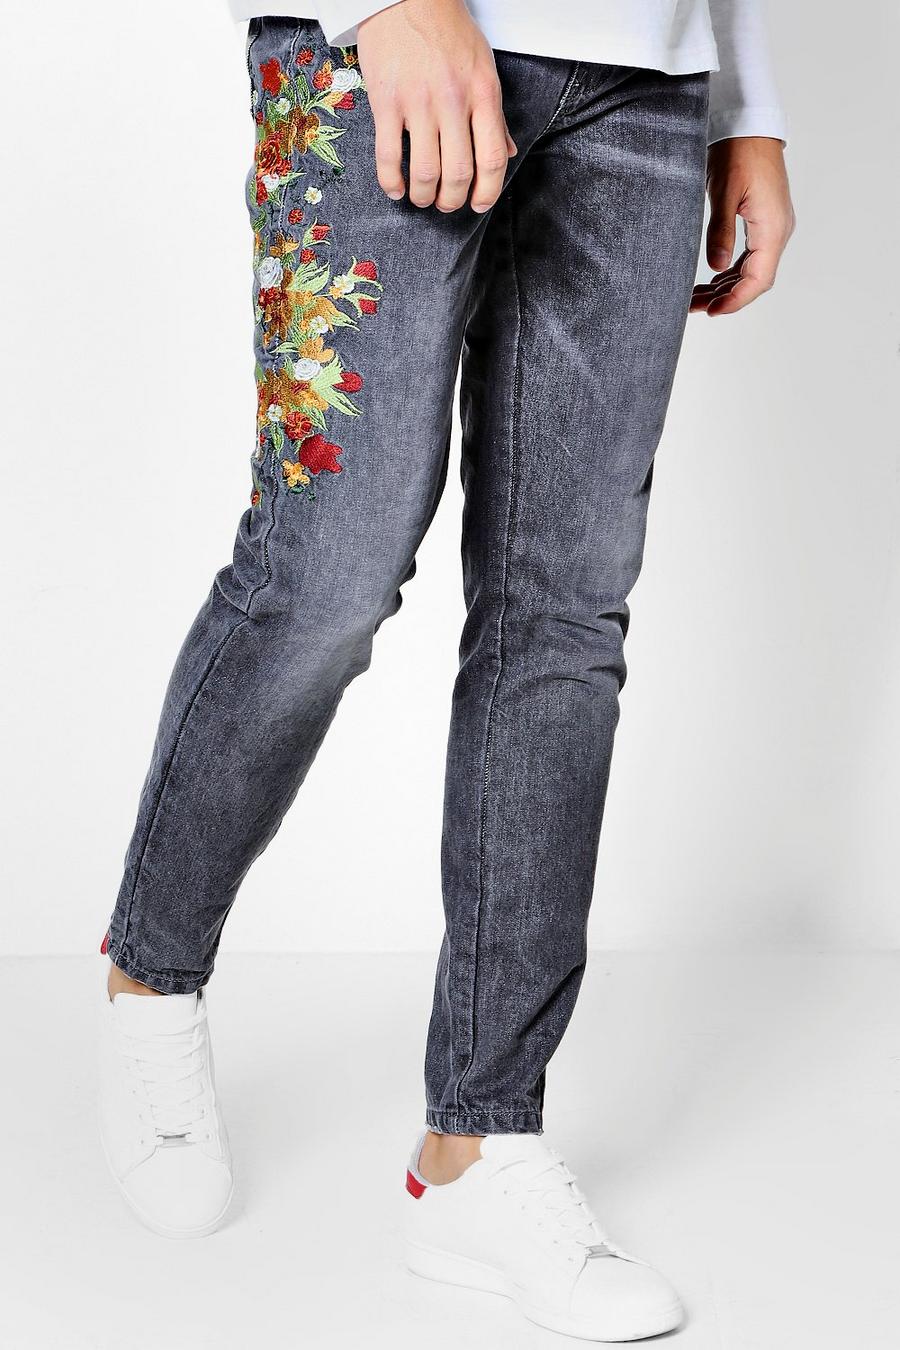  VooZuGn Fashion Jeans Men Denim Flowers of Embroidery Jeans Men  : Clothing, Shoes & Jewelry